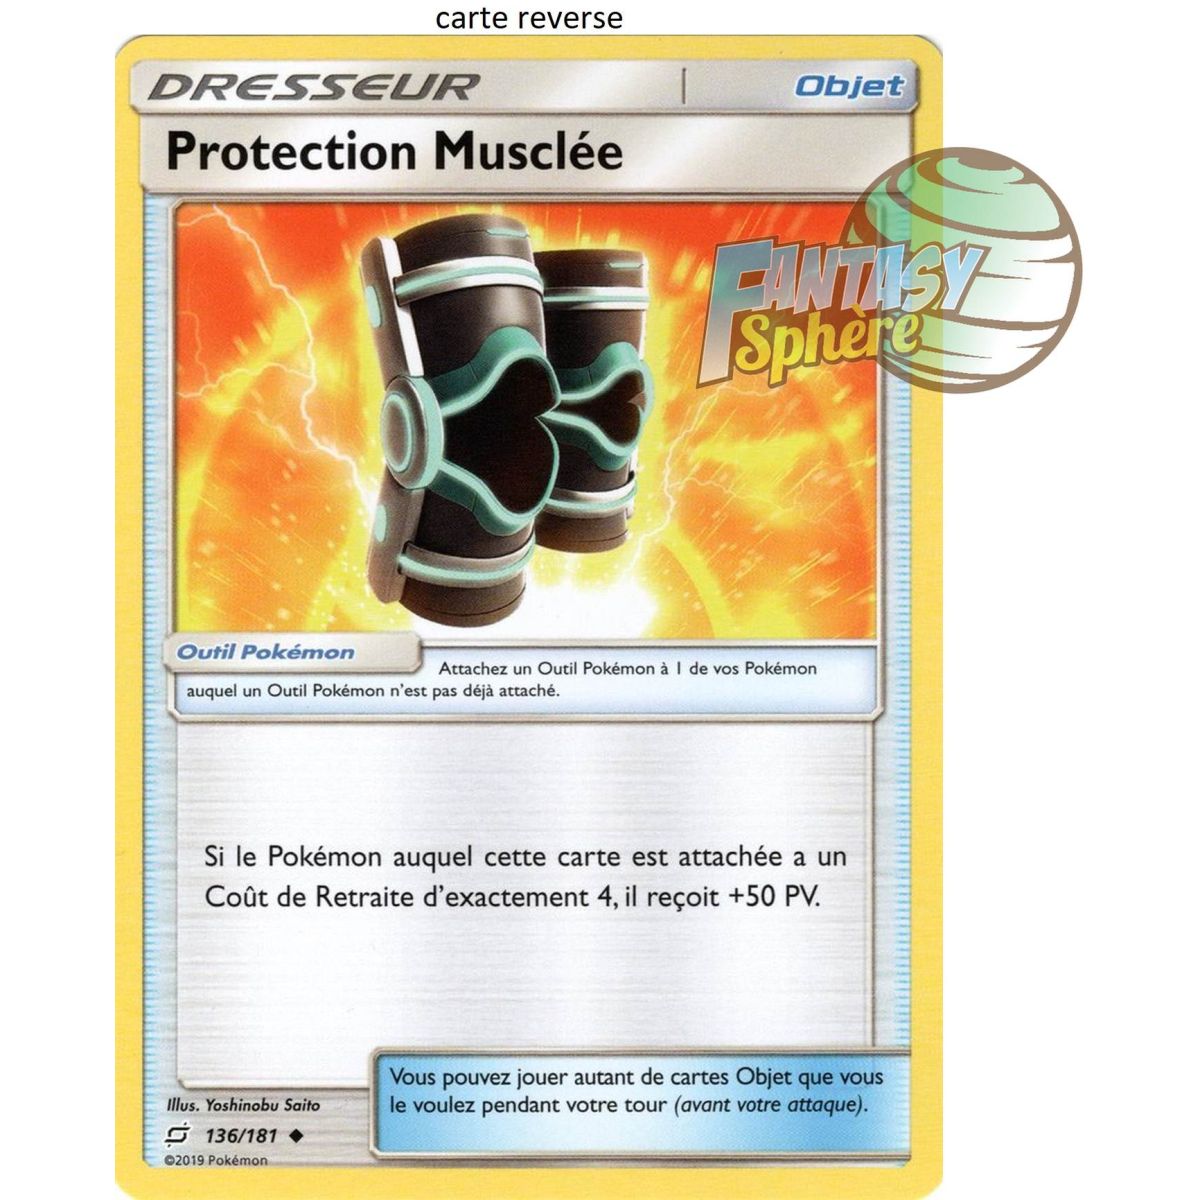 Muscular Protection - Reverse 136/181 - Sun and Moon 9 Shock Duo